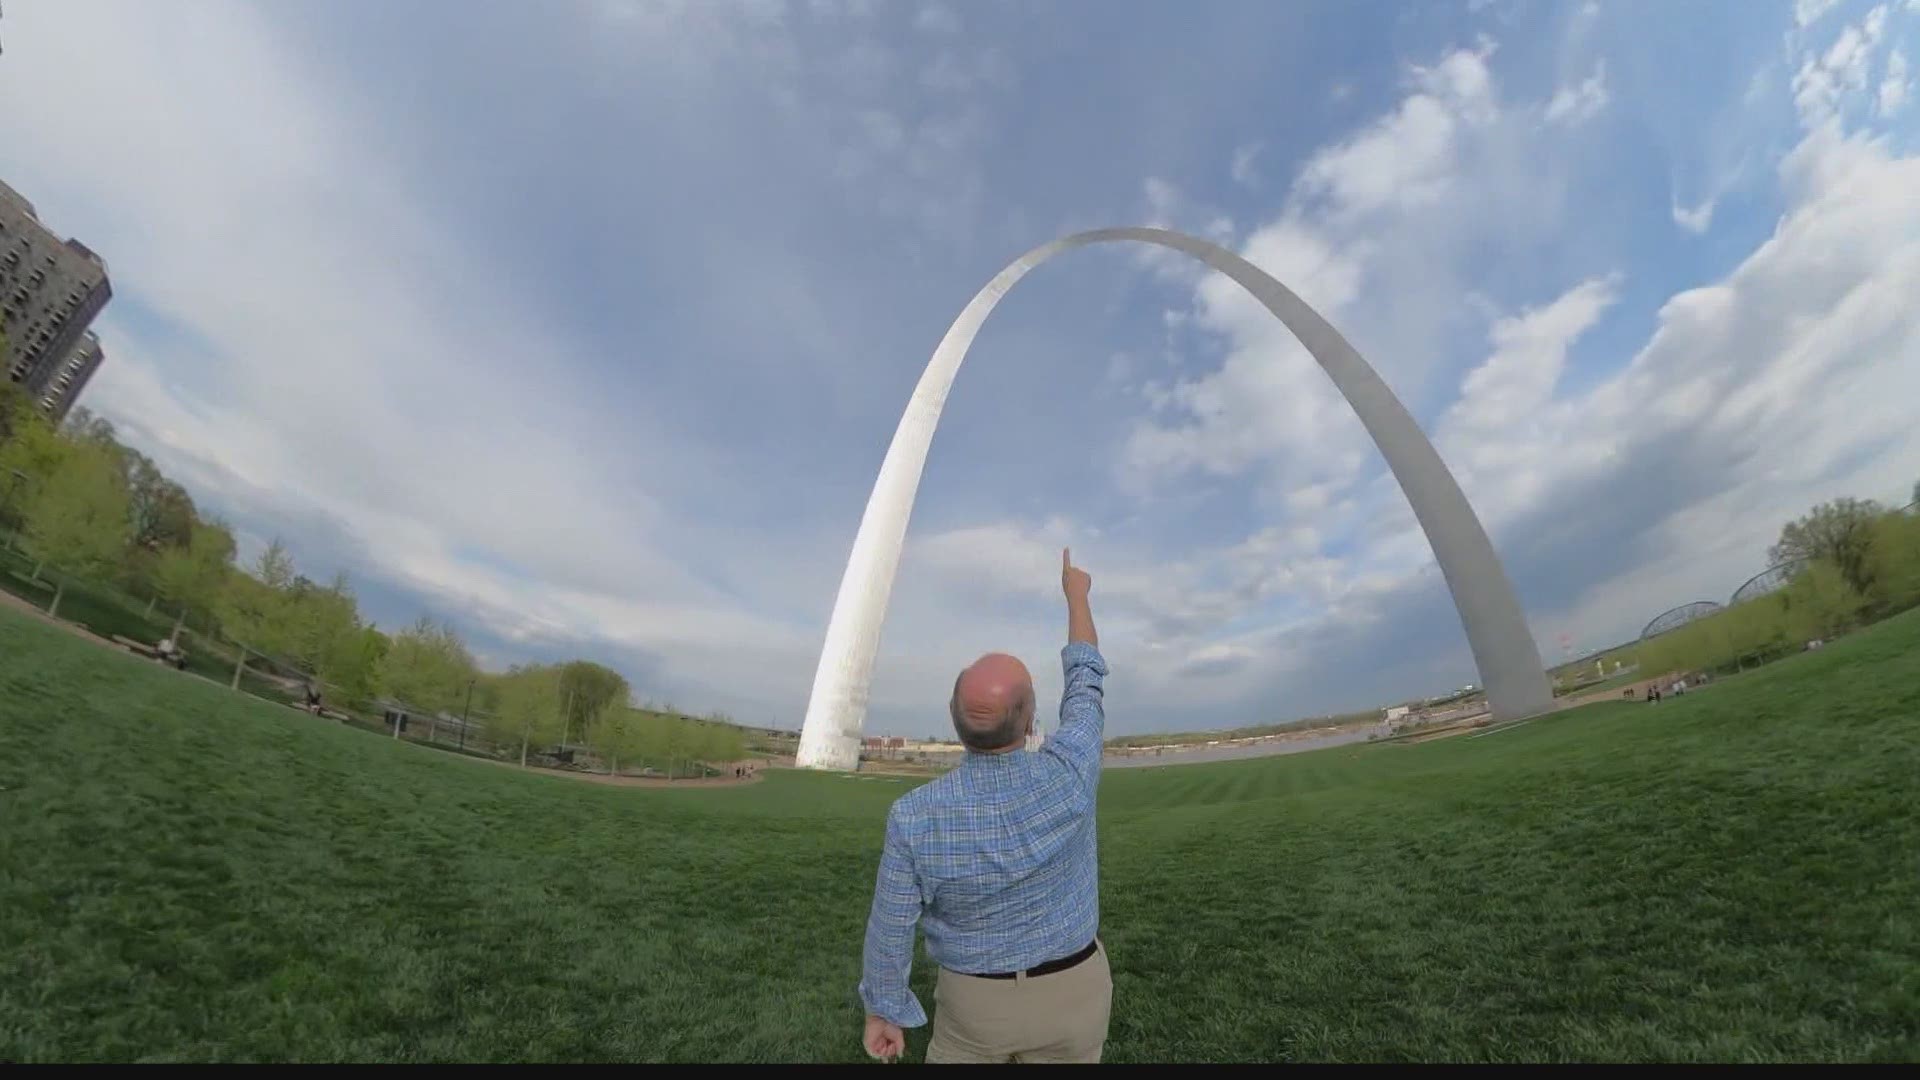 Chuck's latest Big Adventure is kicking off next week. And this time he's in Missouri!